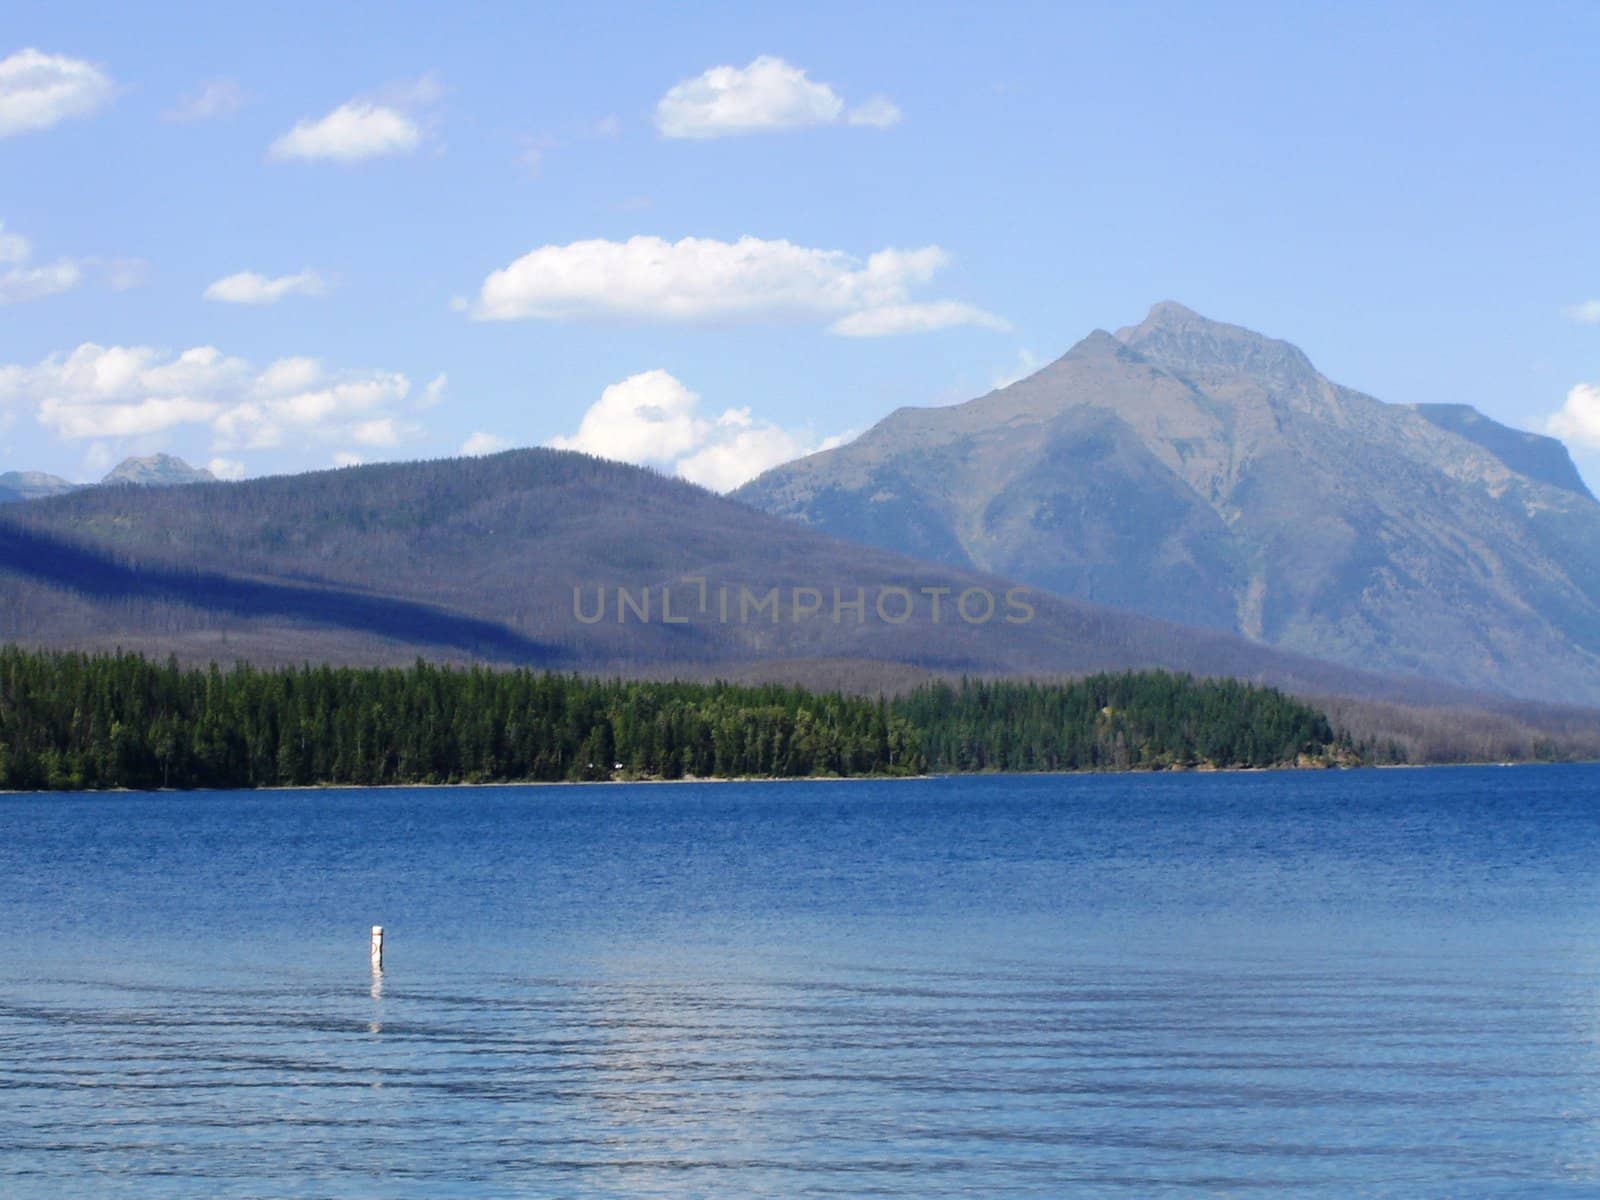 Mountains and water by RefocusPhoto